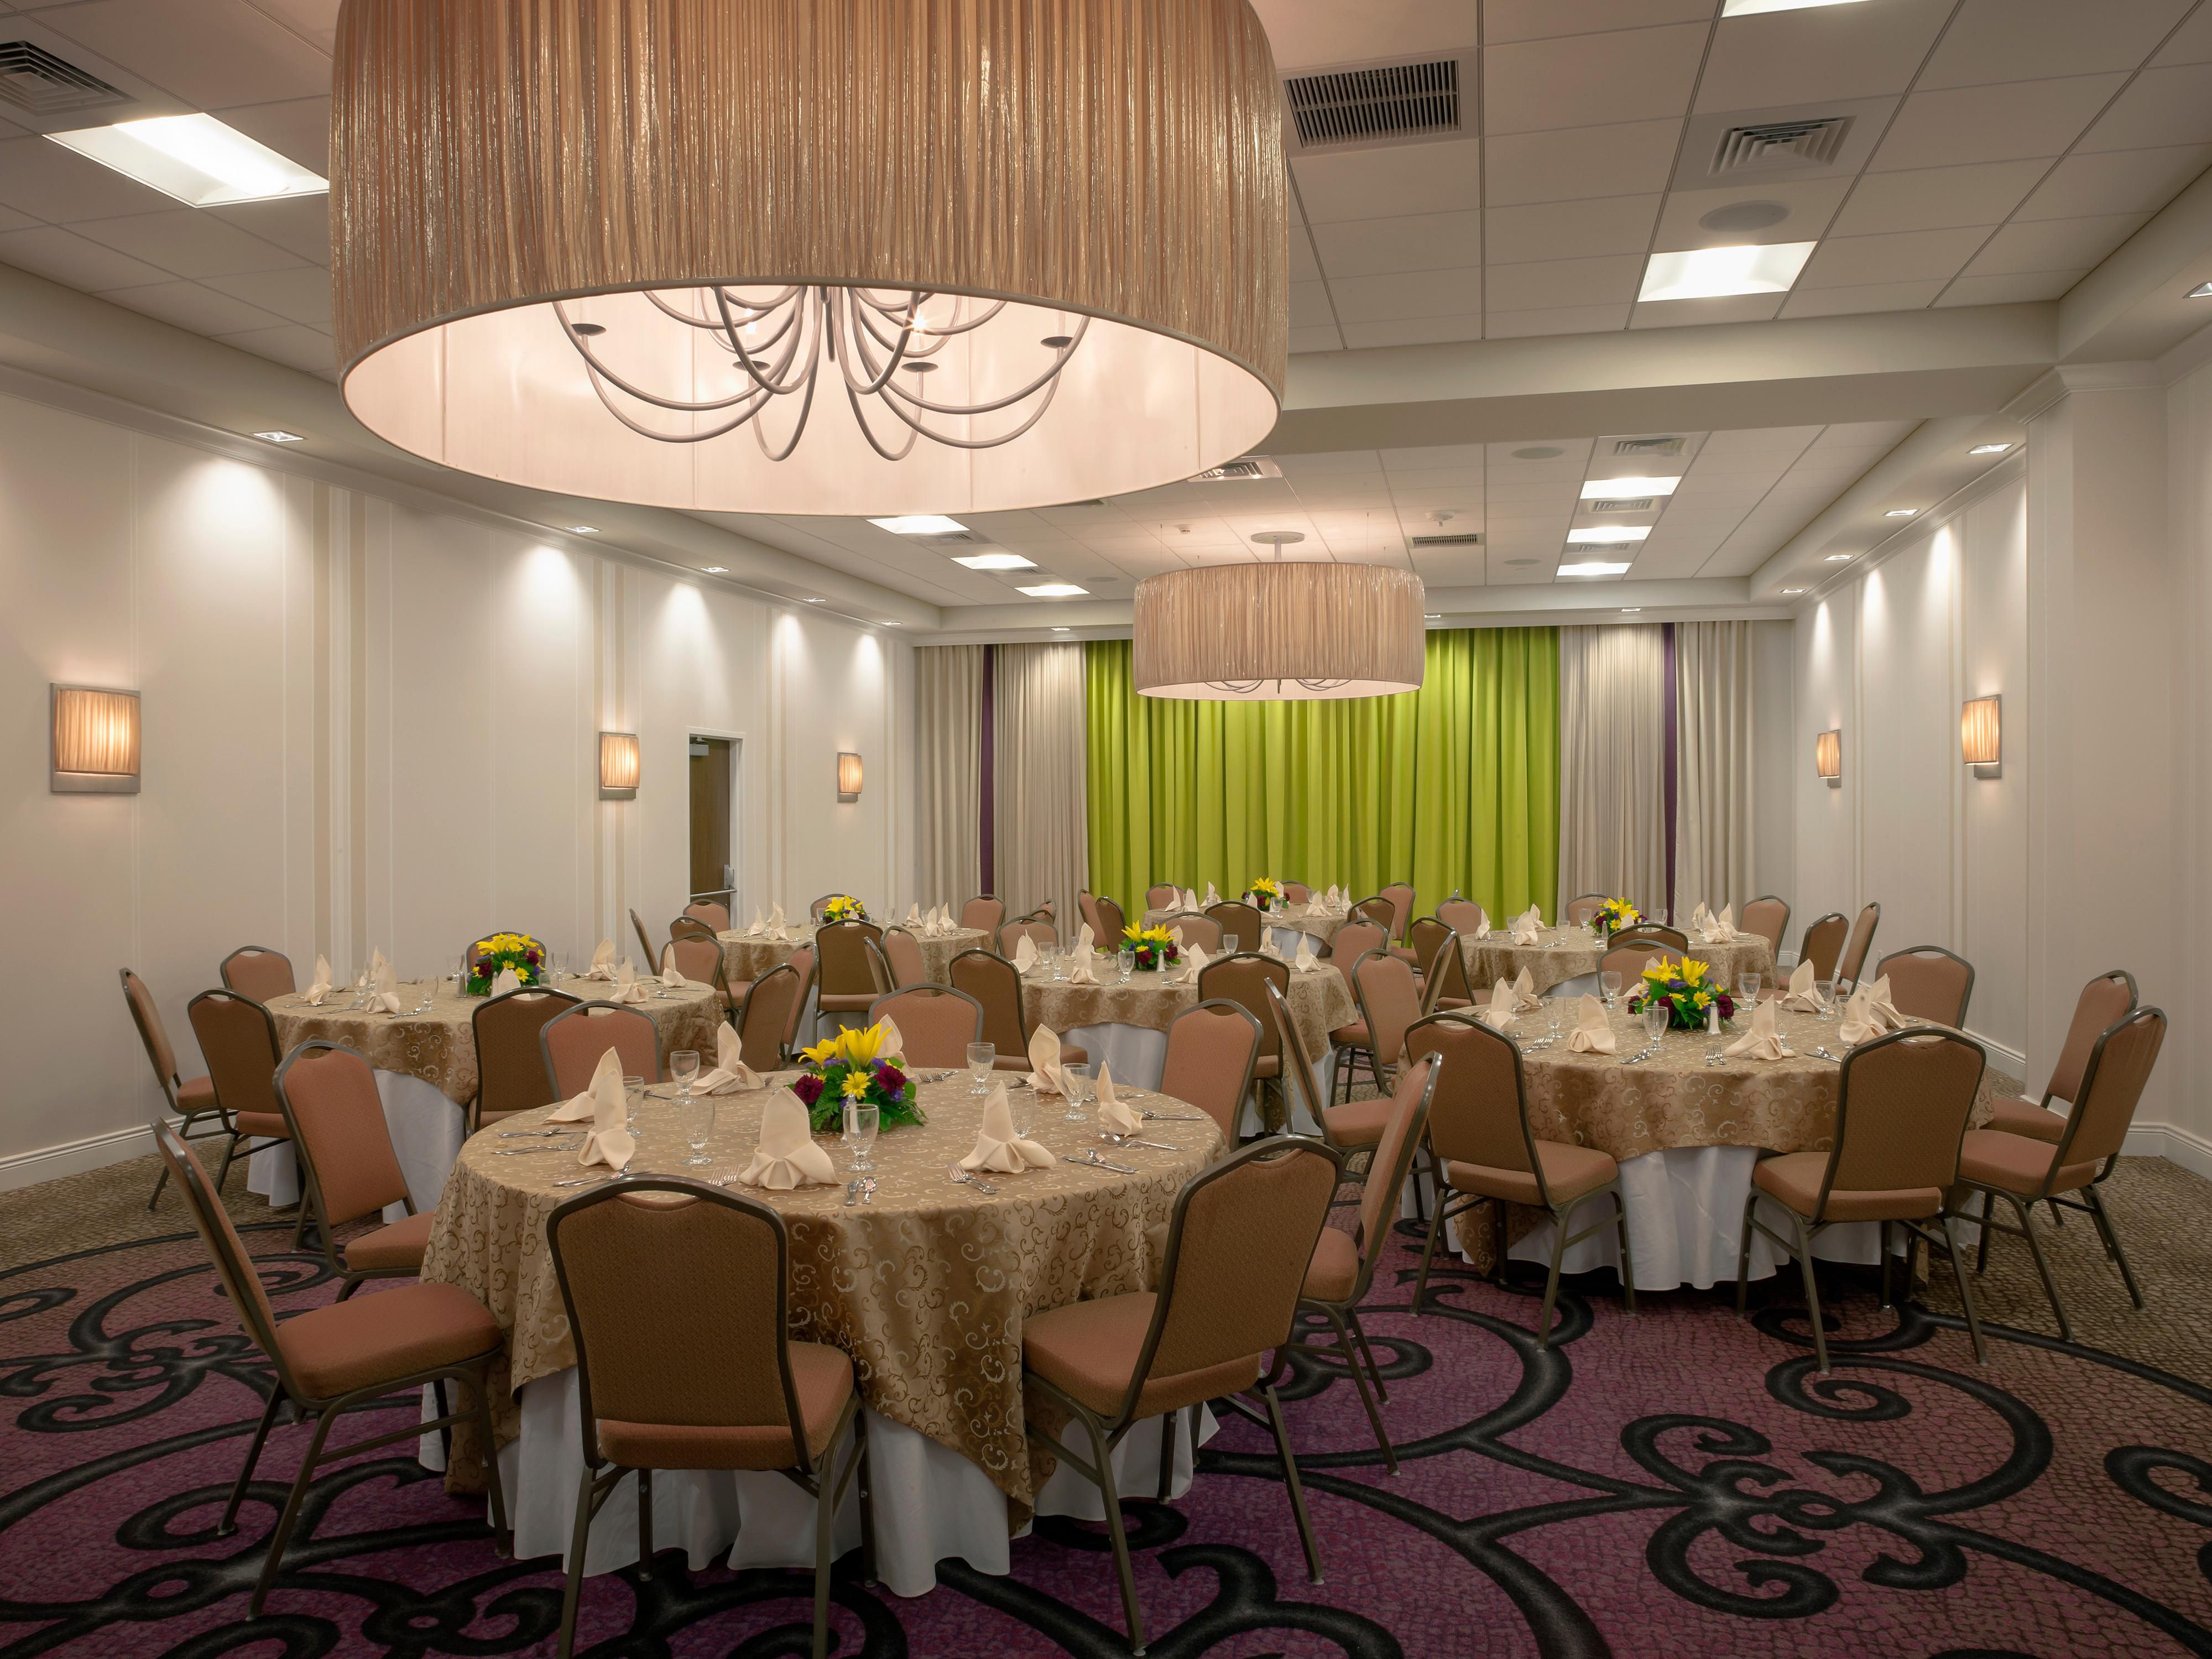 With 6 meeting rooms and 10,000 sq. ft. of indoor and outdoor event space, we can seat up to 200 guests for a wedding or 150 guests for a classroom-style meeting. Our event space can be beautifully transformed to meet the needs of your style and budget. Contact our professional event planners for a free custom quote today!